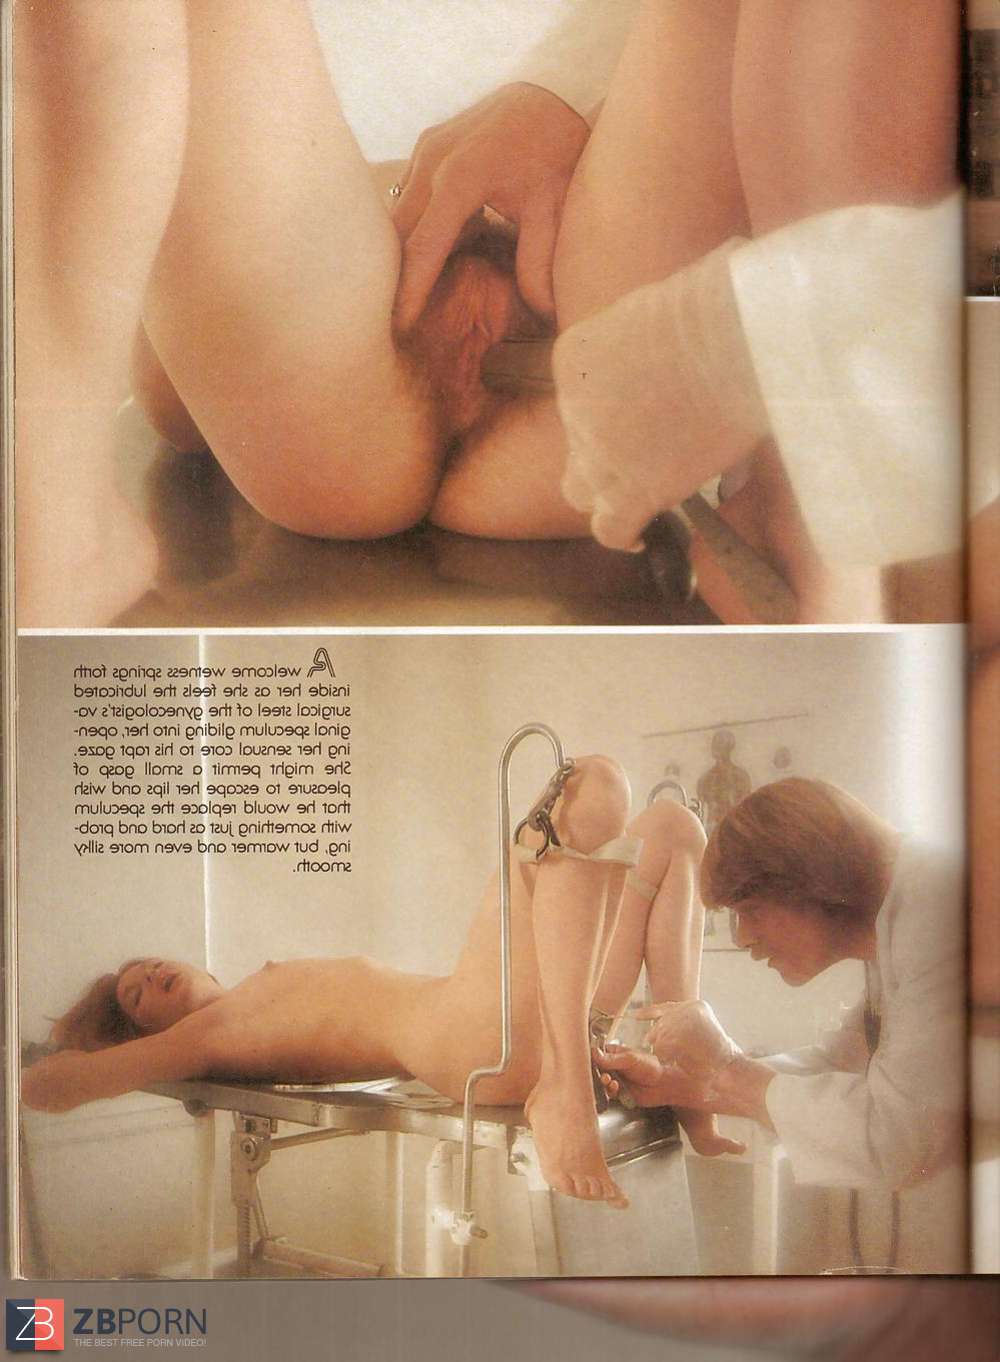 Hustler July 1976 A Day In The Life Of A Gynecologist Zb Porn